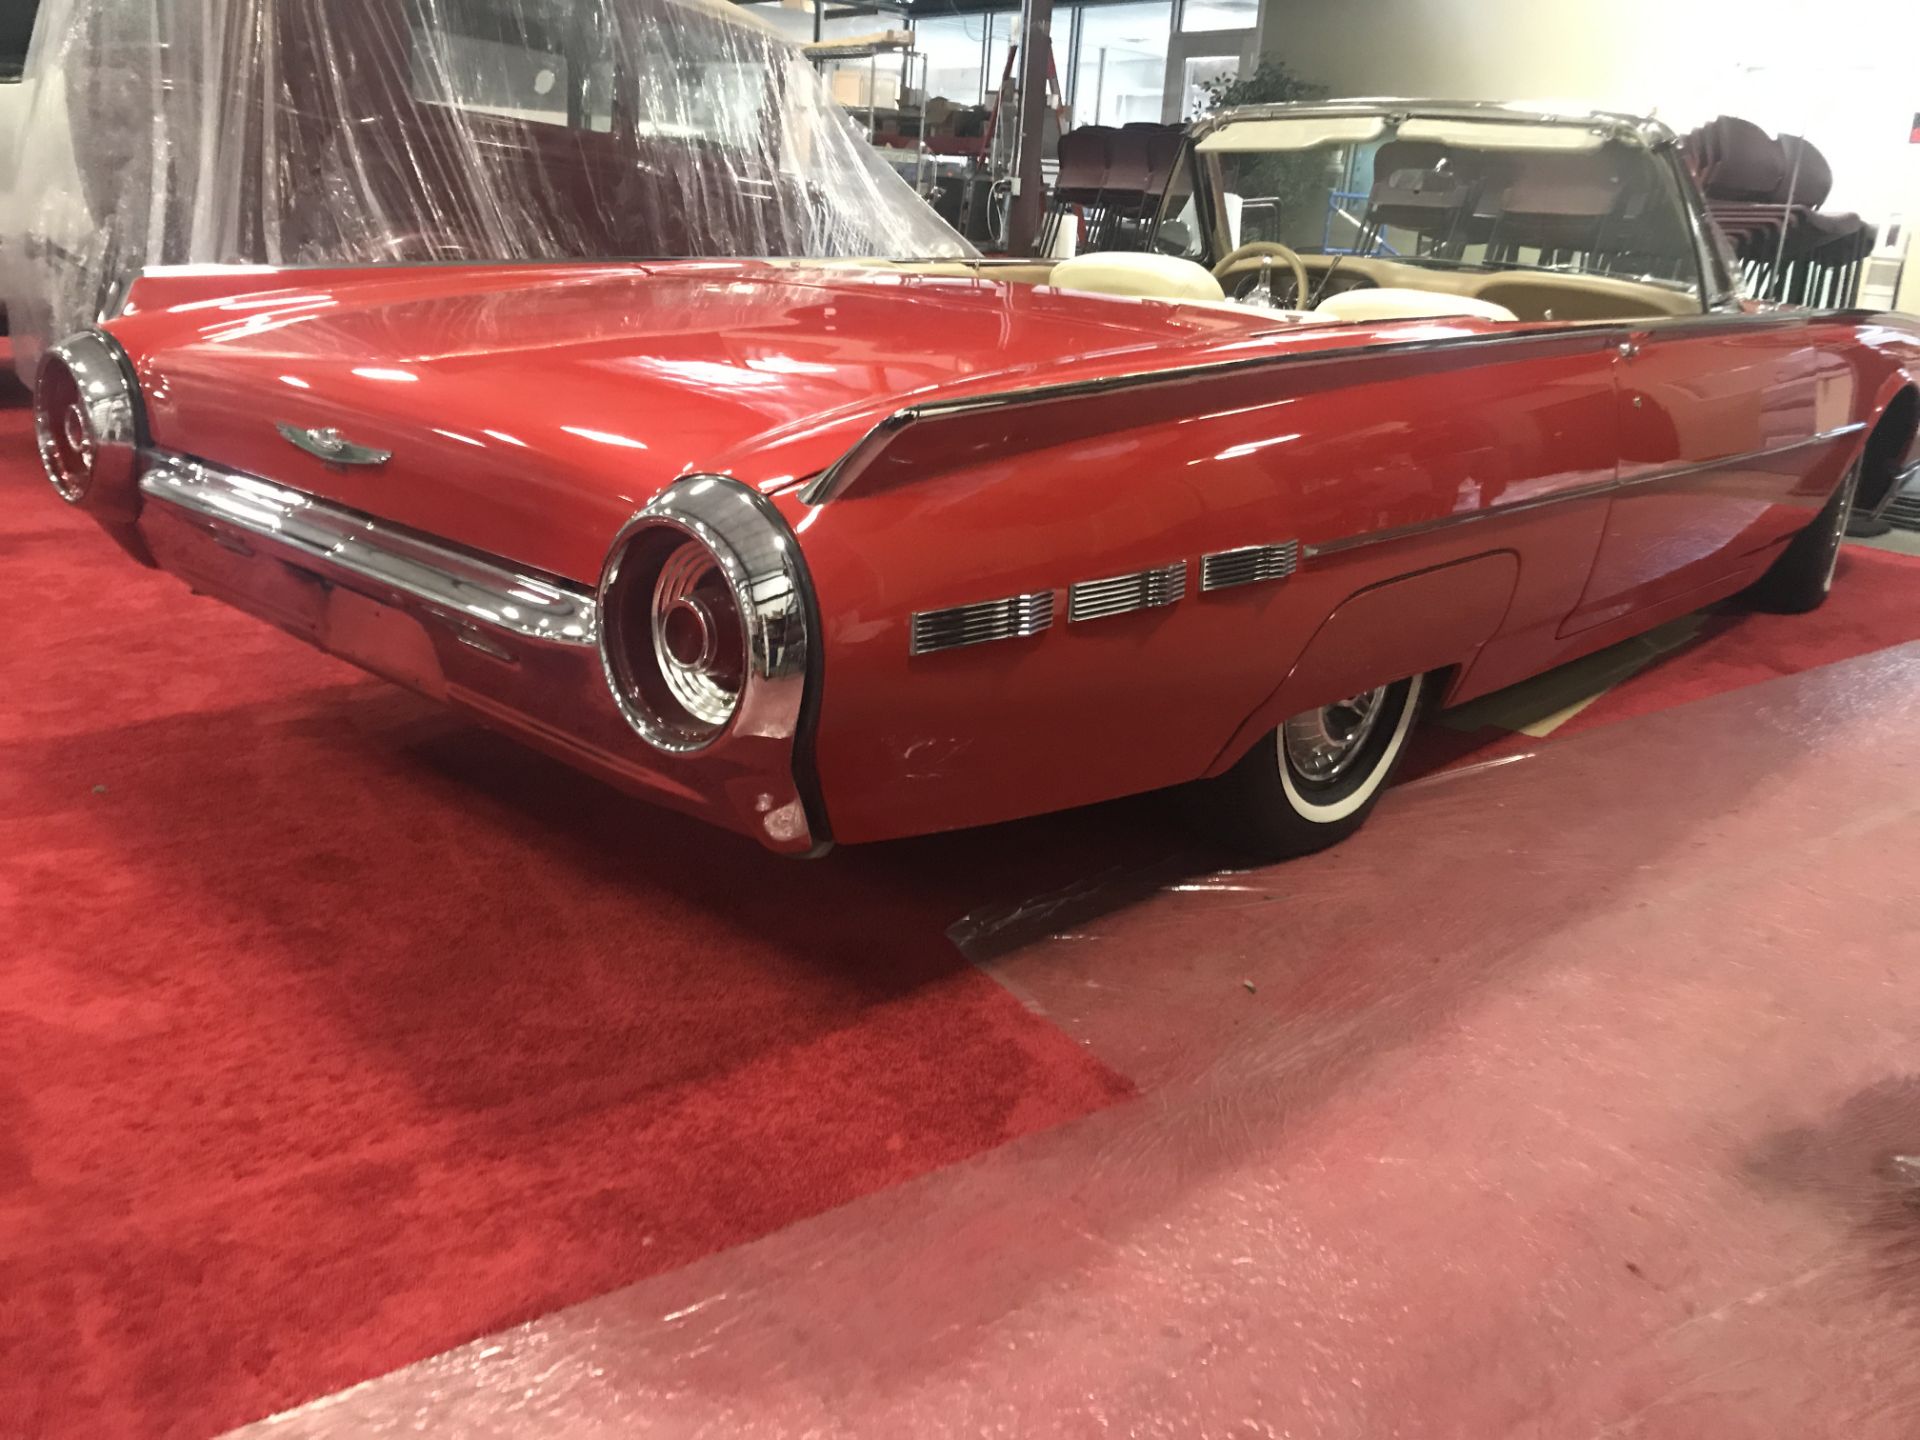 1961 CLASSIC FORD THUNDERBIRD CONVERTIBLE - Image 3 of 13